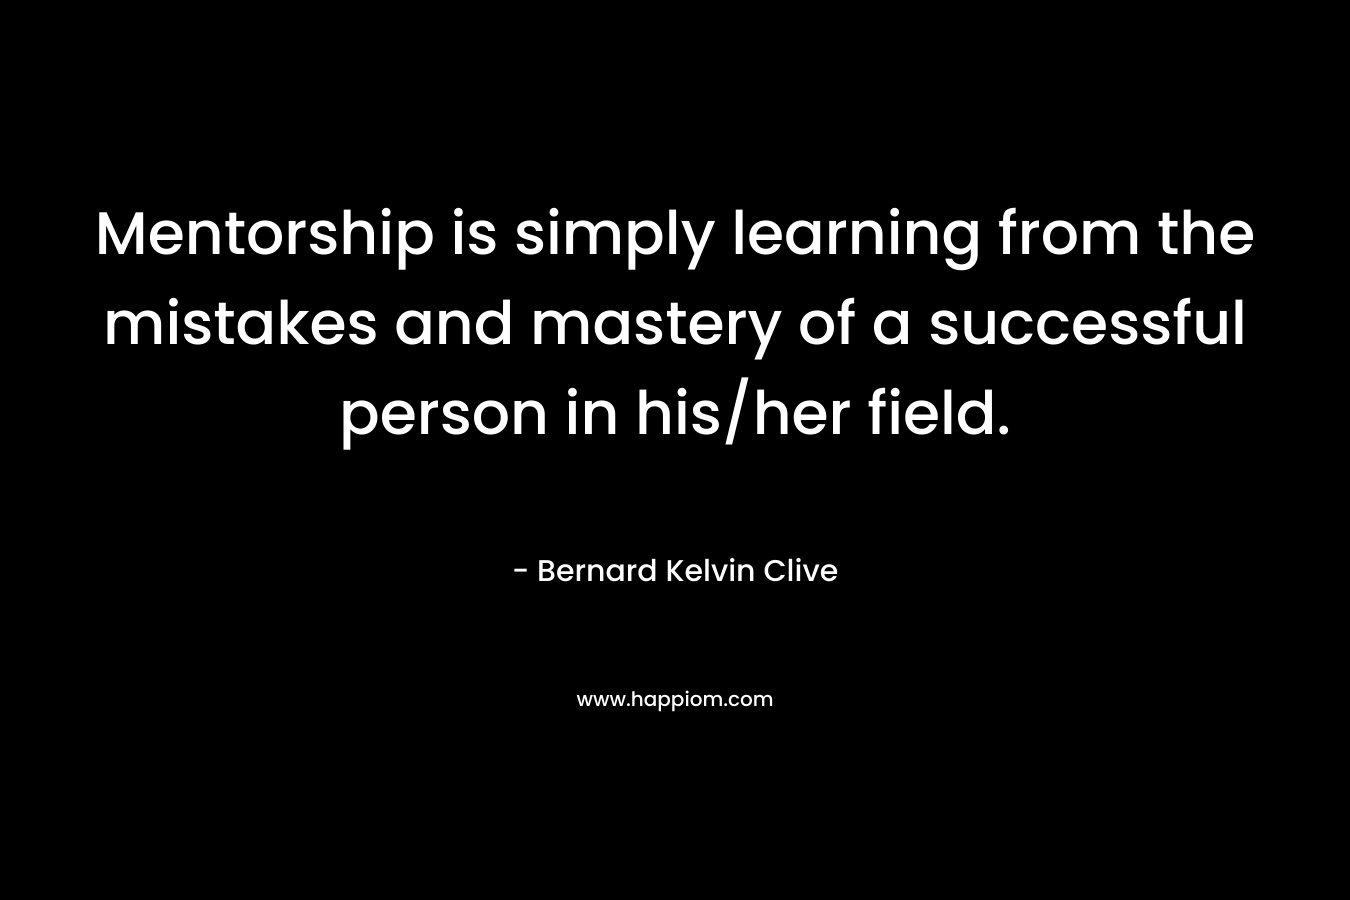 Mentorship is simply learning from the mistakes and mastery of a successful person in his/her field.